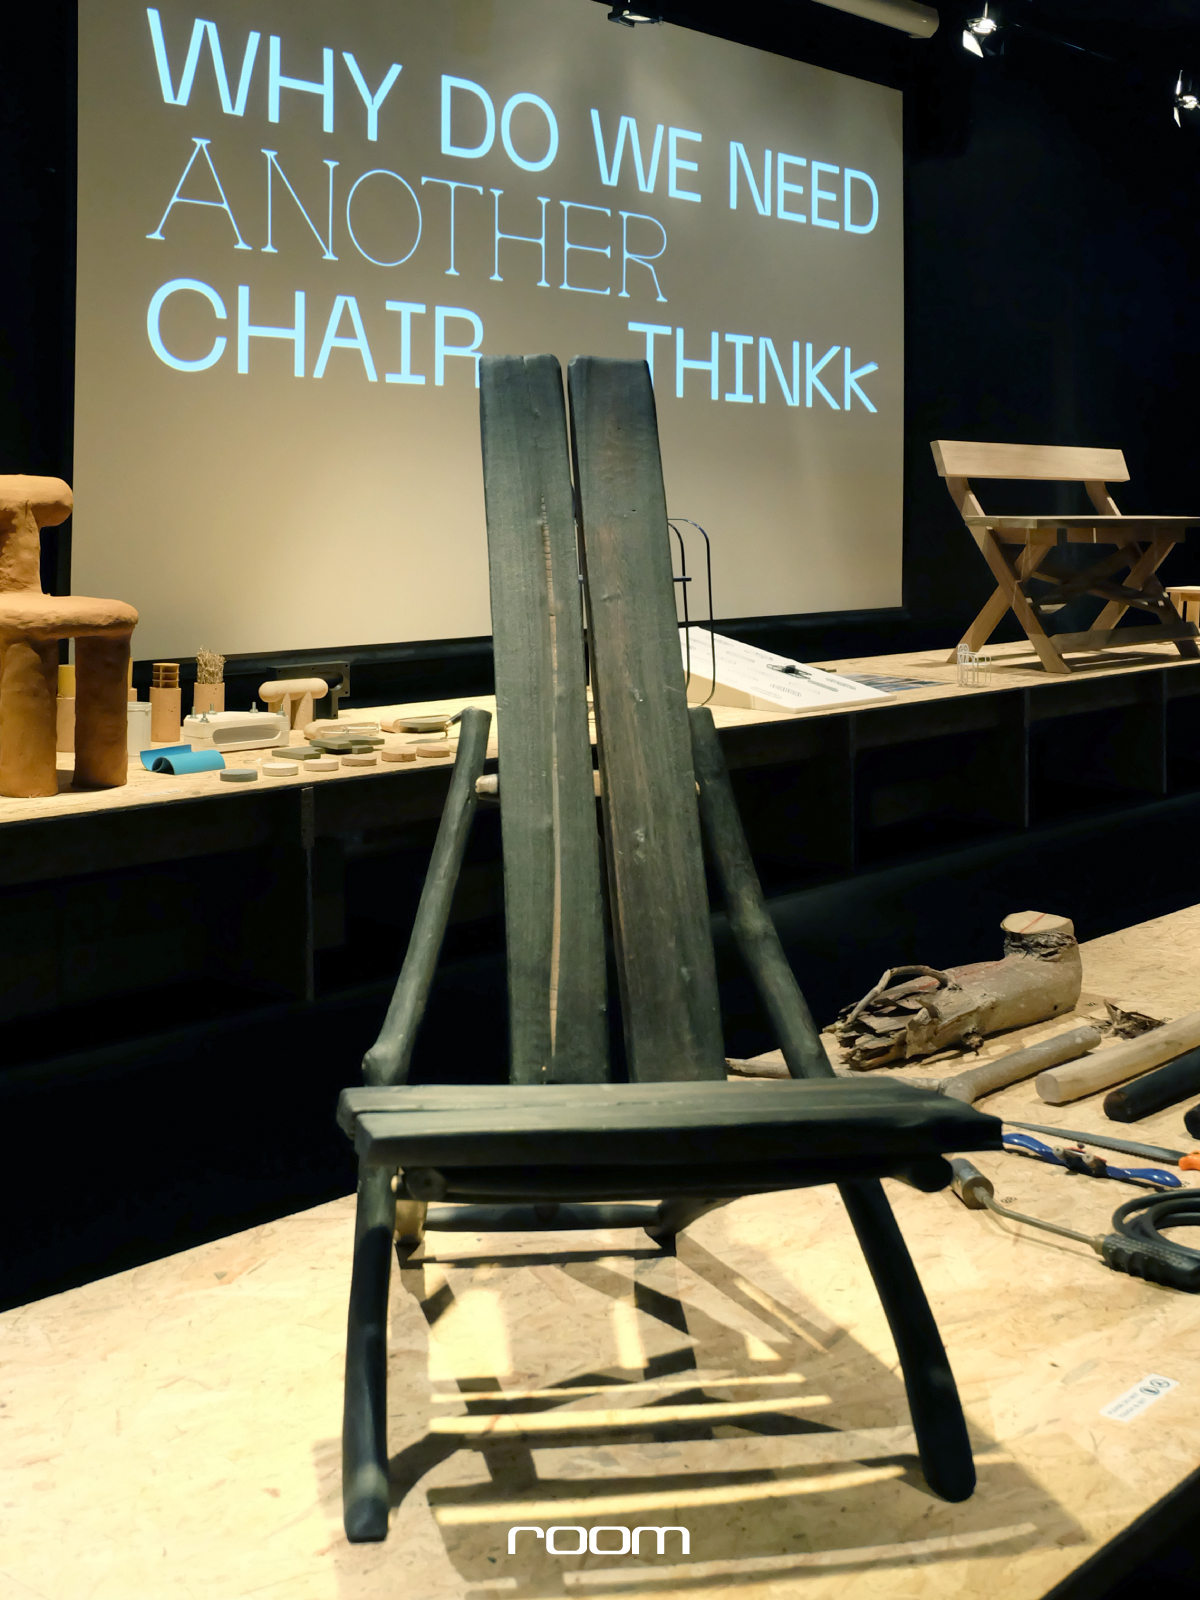 THINKK Together WHY DO WE NEED ANOTHER CHAIR? Bangkok Design Week 2020